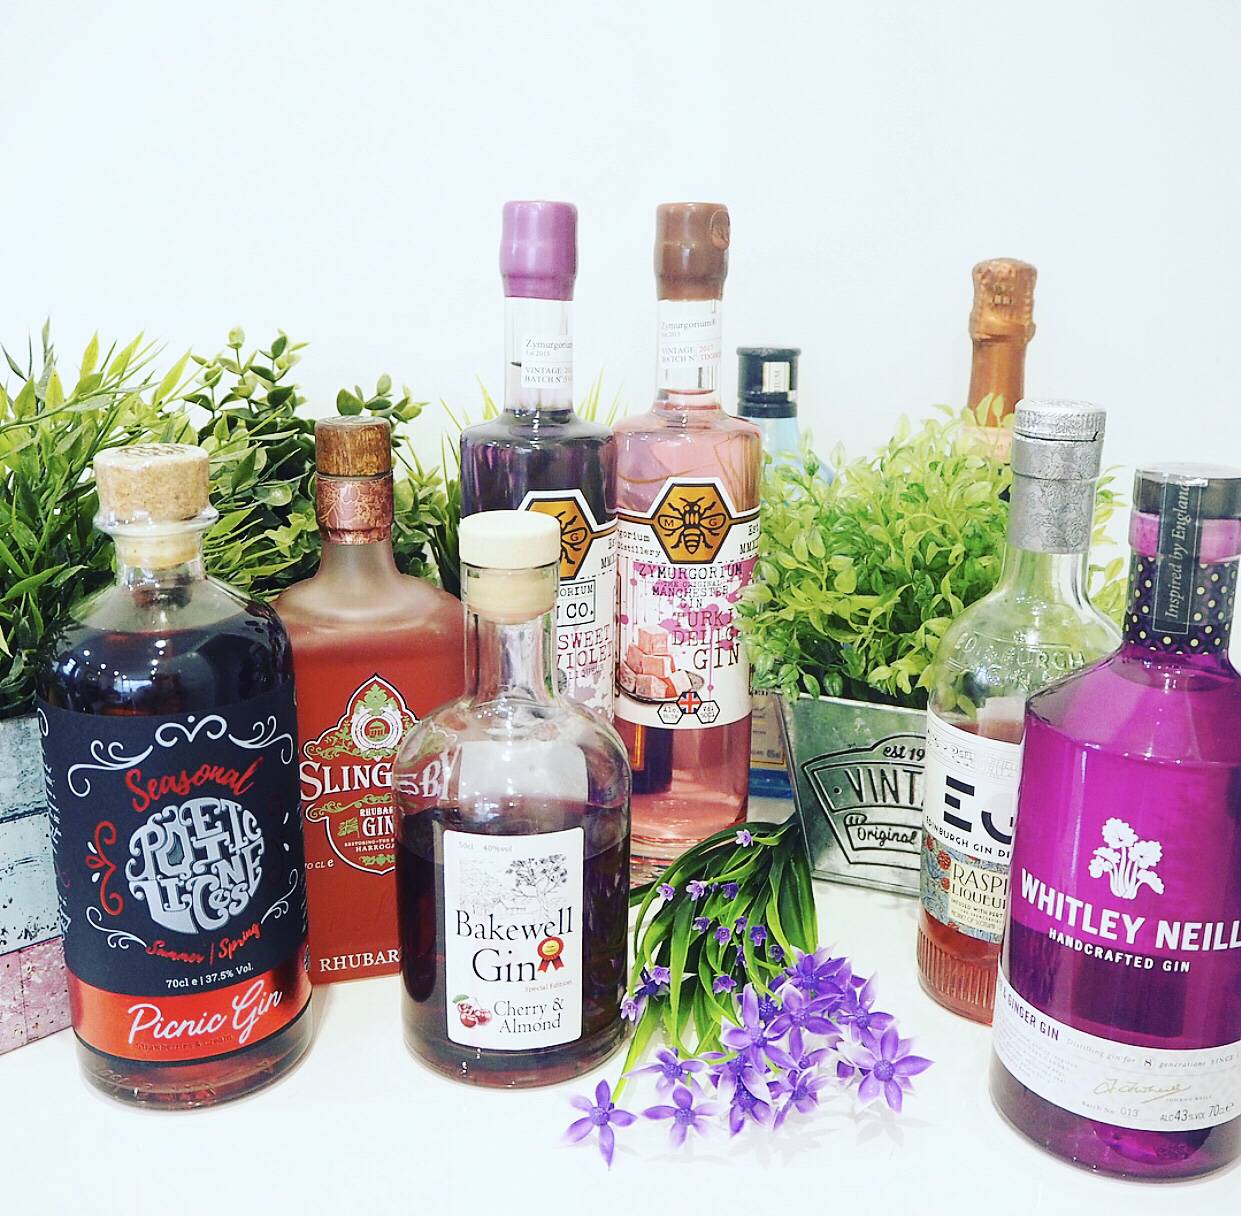 My Favourite Flavoured Gins - Zymurgorium Sweet Violet Gin, Zymurgorium Turkish Delight Gin, Bakewell Gin, Poetic Licence Strawberry Picnic Gin, Slingsby Rhubarb Gin, Whitley Neill Rhubarb and Ginger Gin, Edinburgh Gin Rasperry